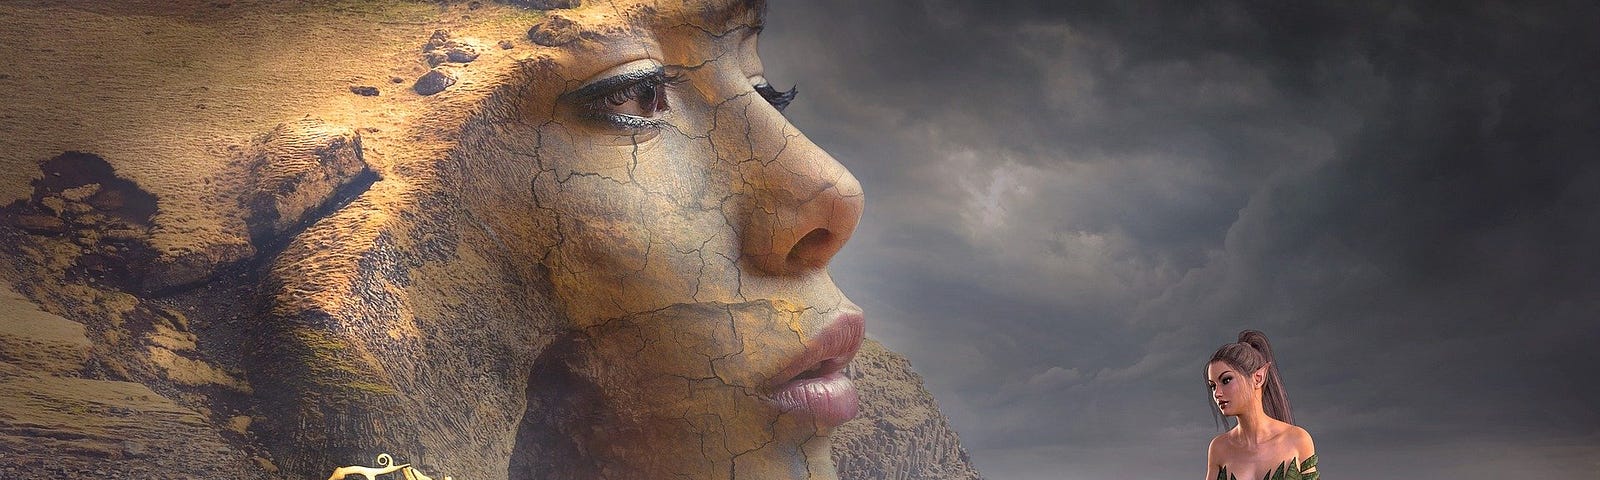 Fantasy image of woman’s head looking out to sea and a sandy shoreline